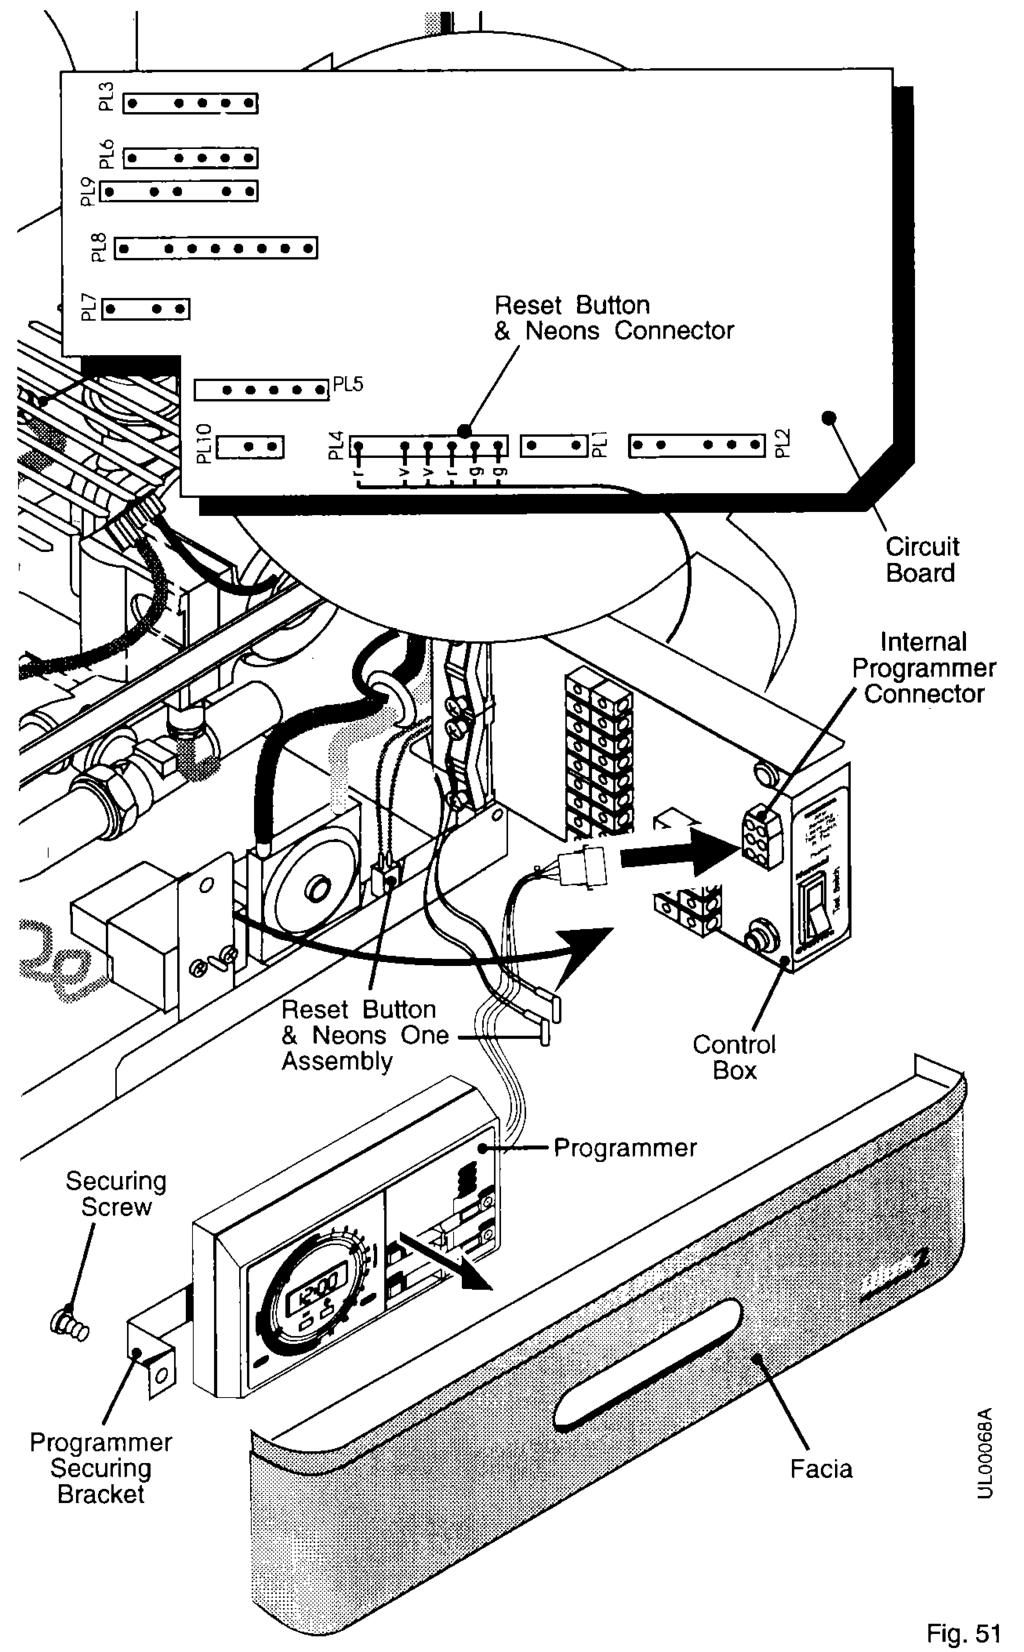 Replacement of Parts - Page 43 6.10 Ignition Circuit Board 1. Gain General Access - See Section 6.1, Paragraph 1. 2. Disconnect all wiring harness connectors and the electrode lead from the board.